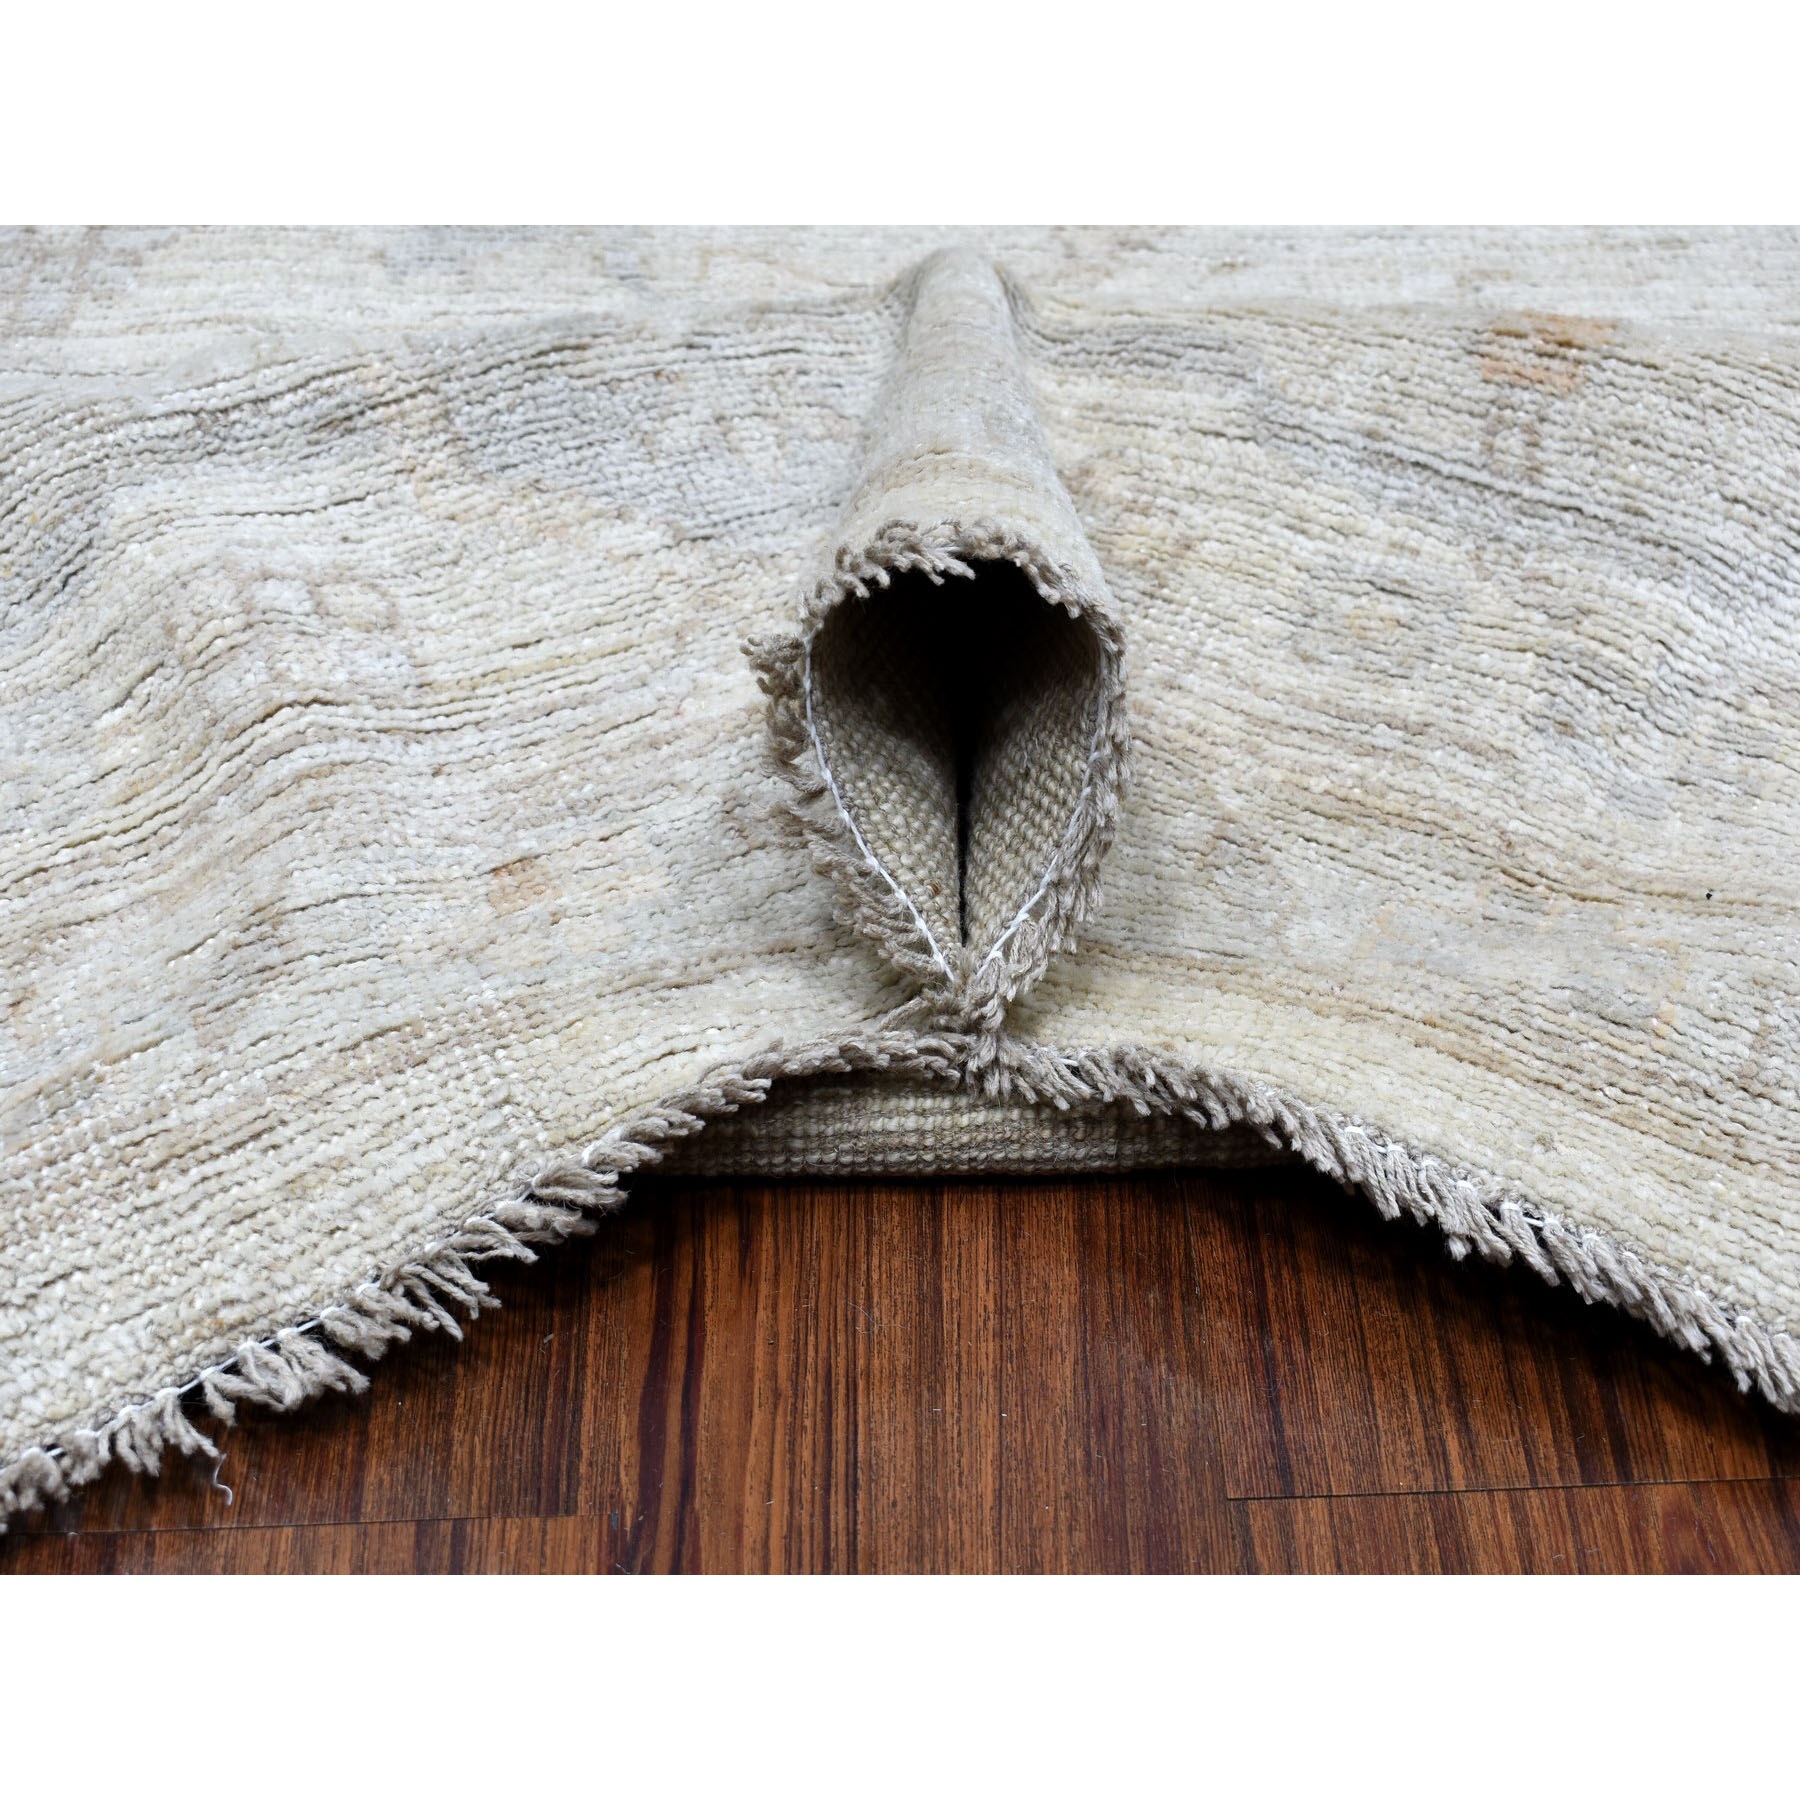 12-1 x14-8  Ivory Oversized Angora Oushak With Soft Silky Wool Hand Knotted Oriental Rug 